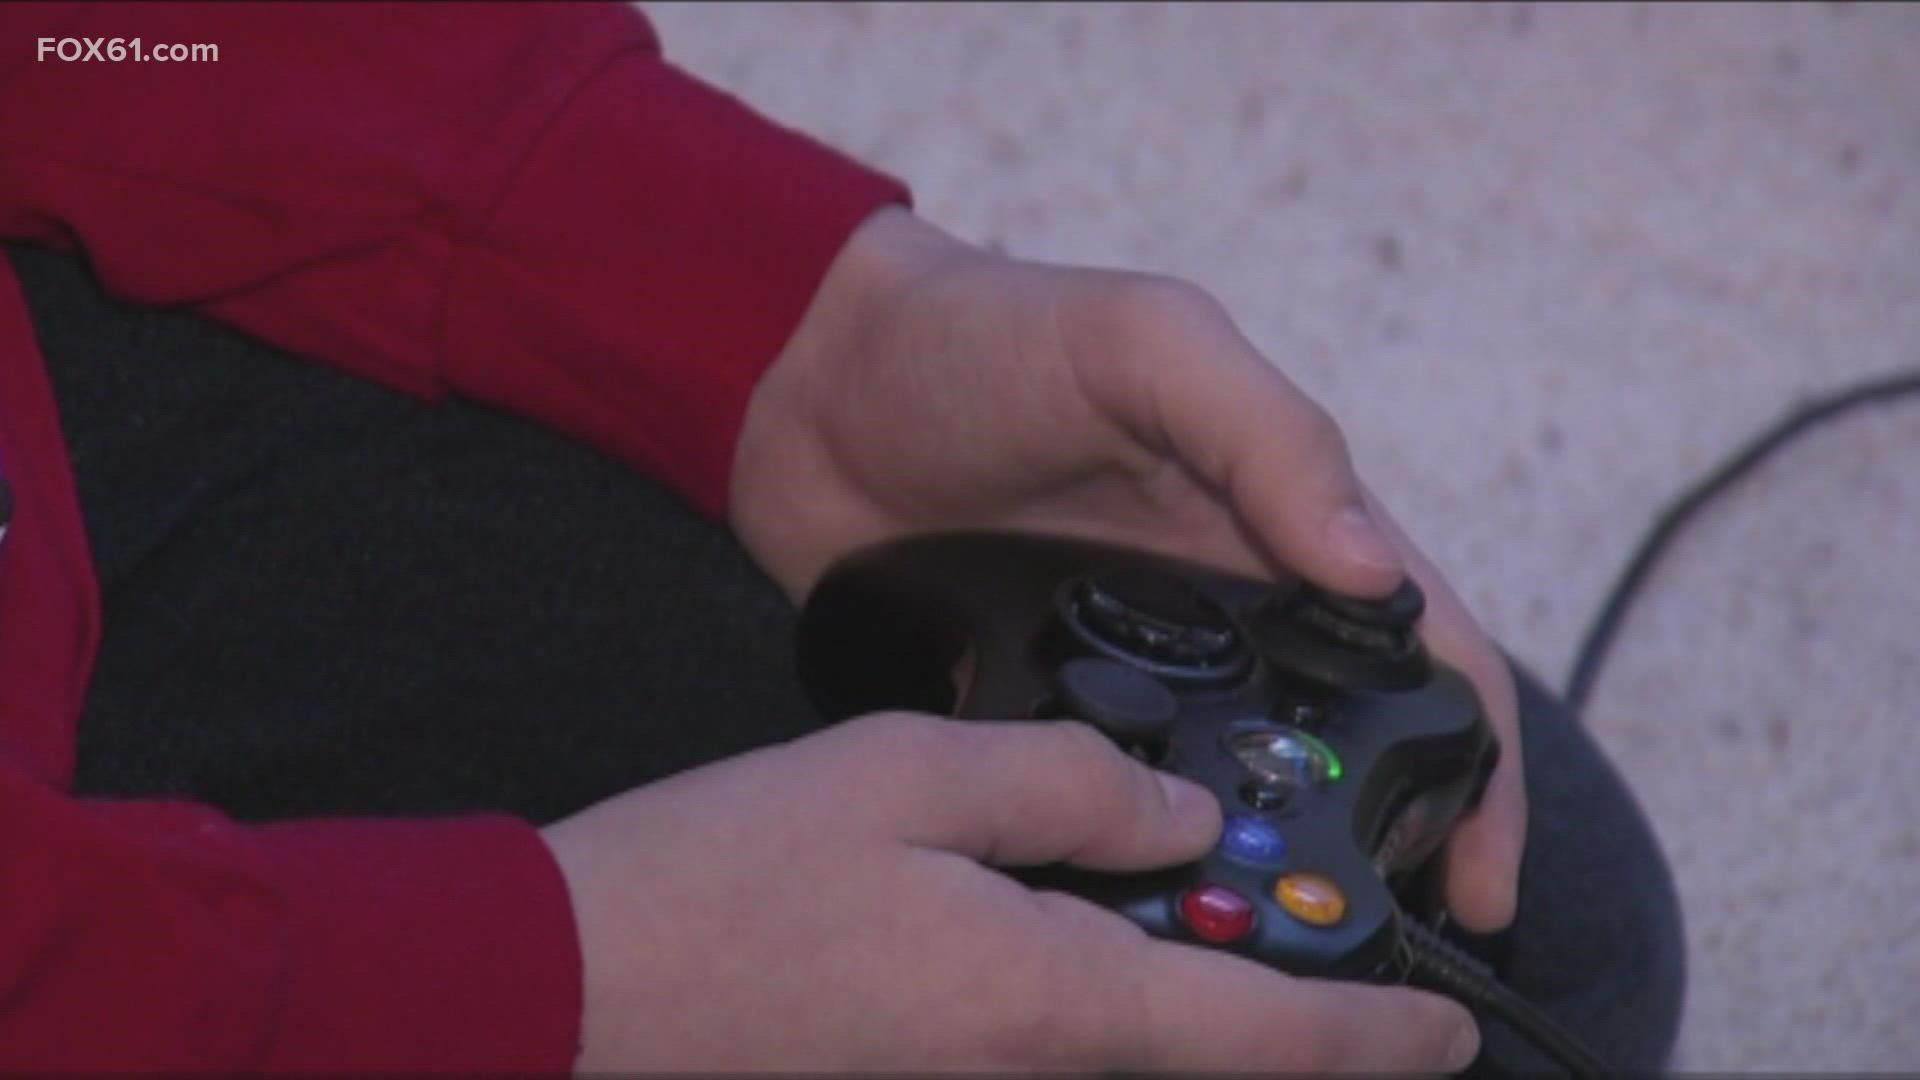 While many parents think video games have a bad influence, a local doctor discusses the findings of a new study that says they could help kids deal with anxiety.